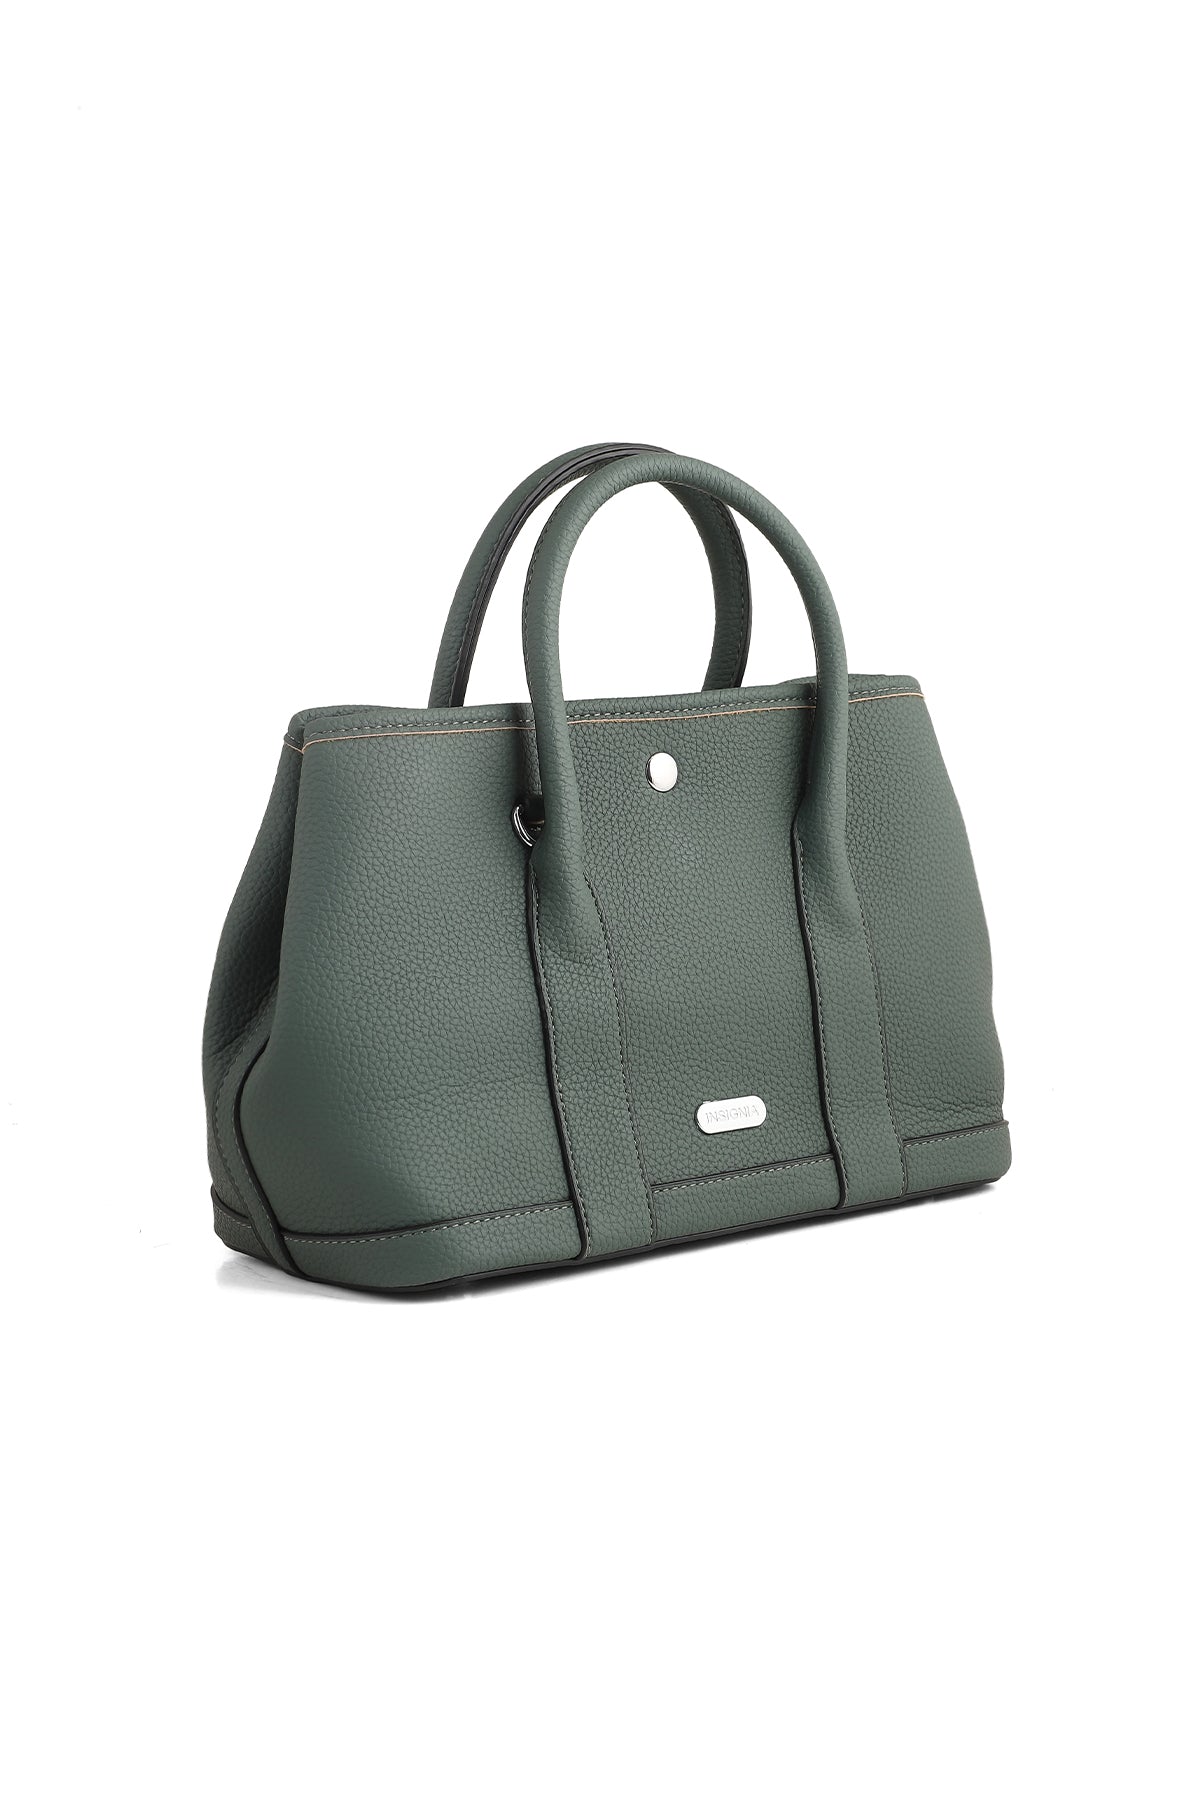 Casual Tote Hand Bags B14983-Green